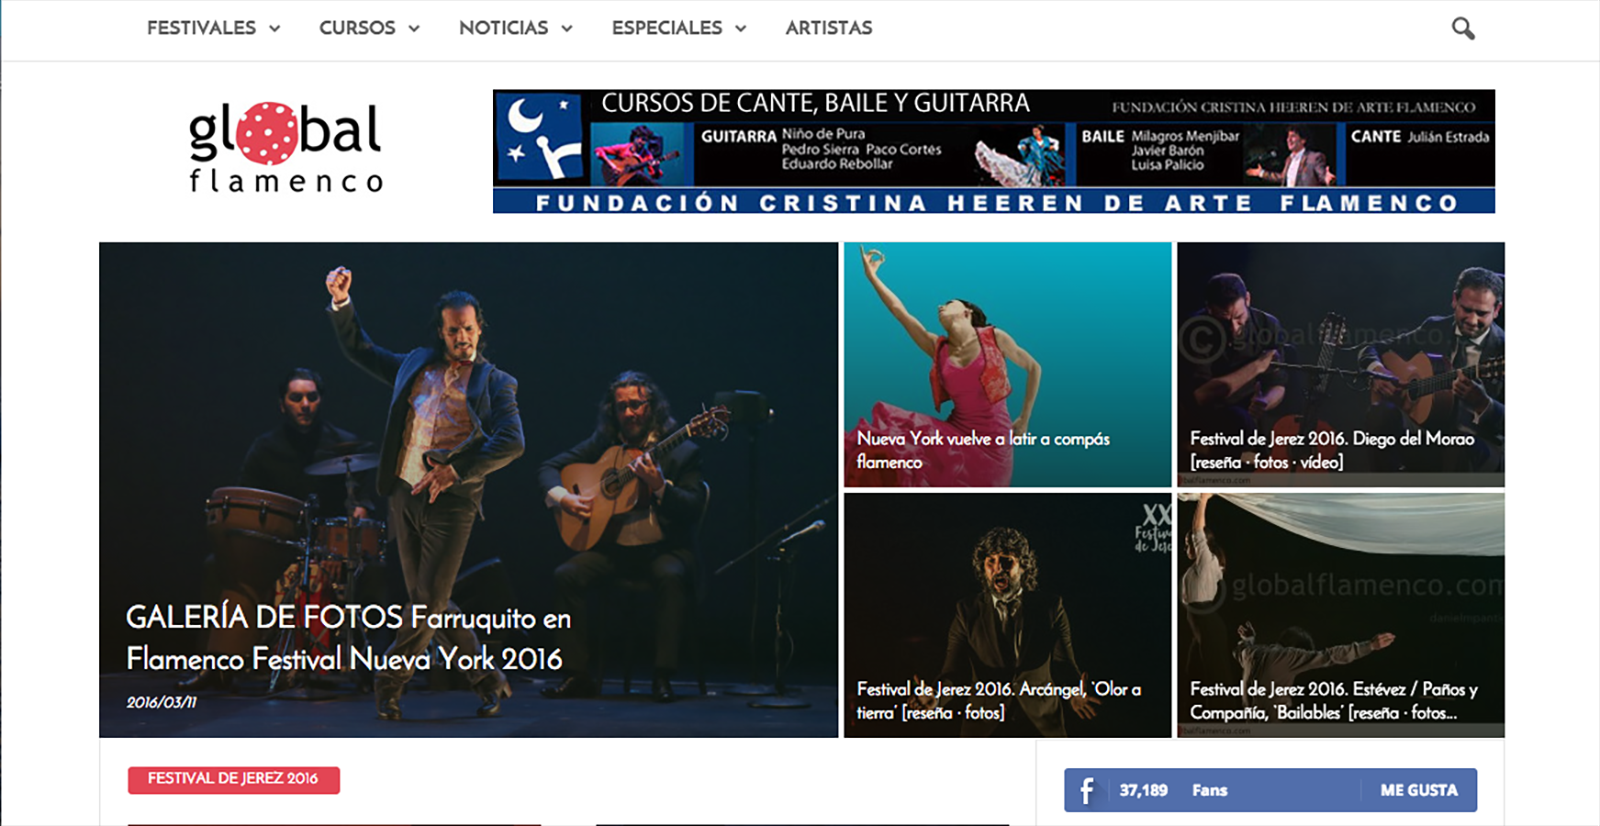 Image from Tearsheets - Global Flamenco